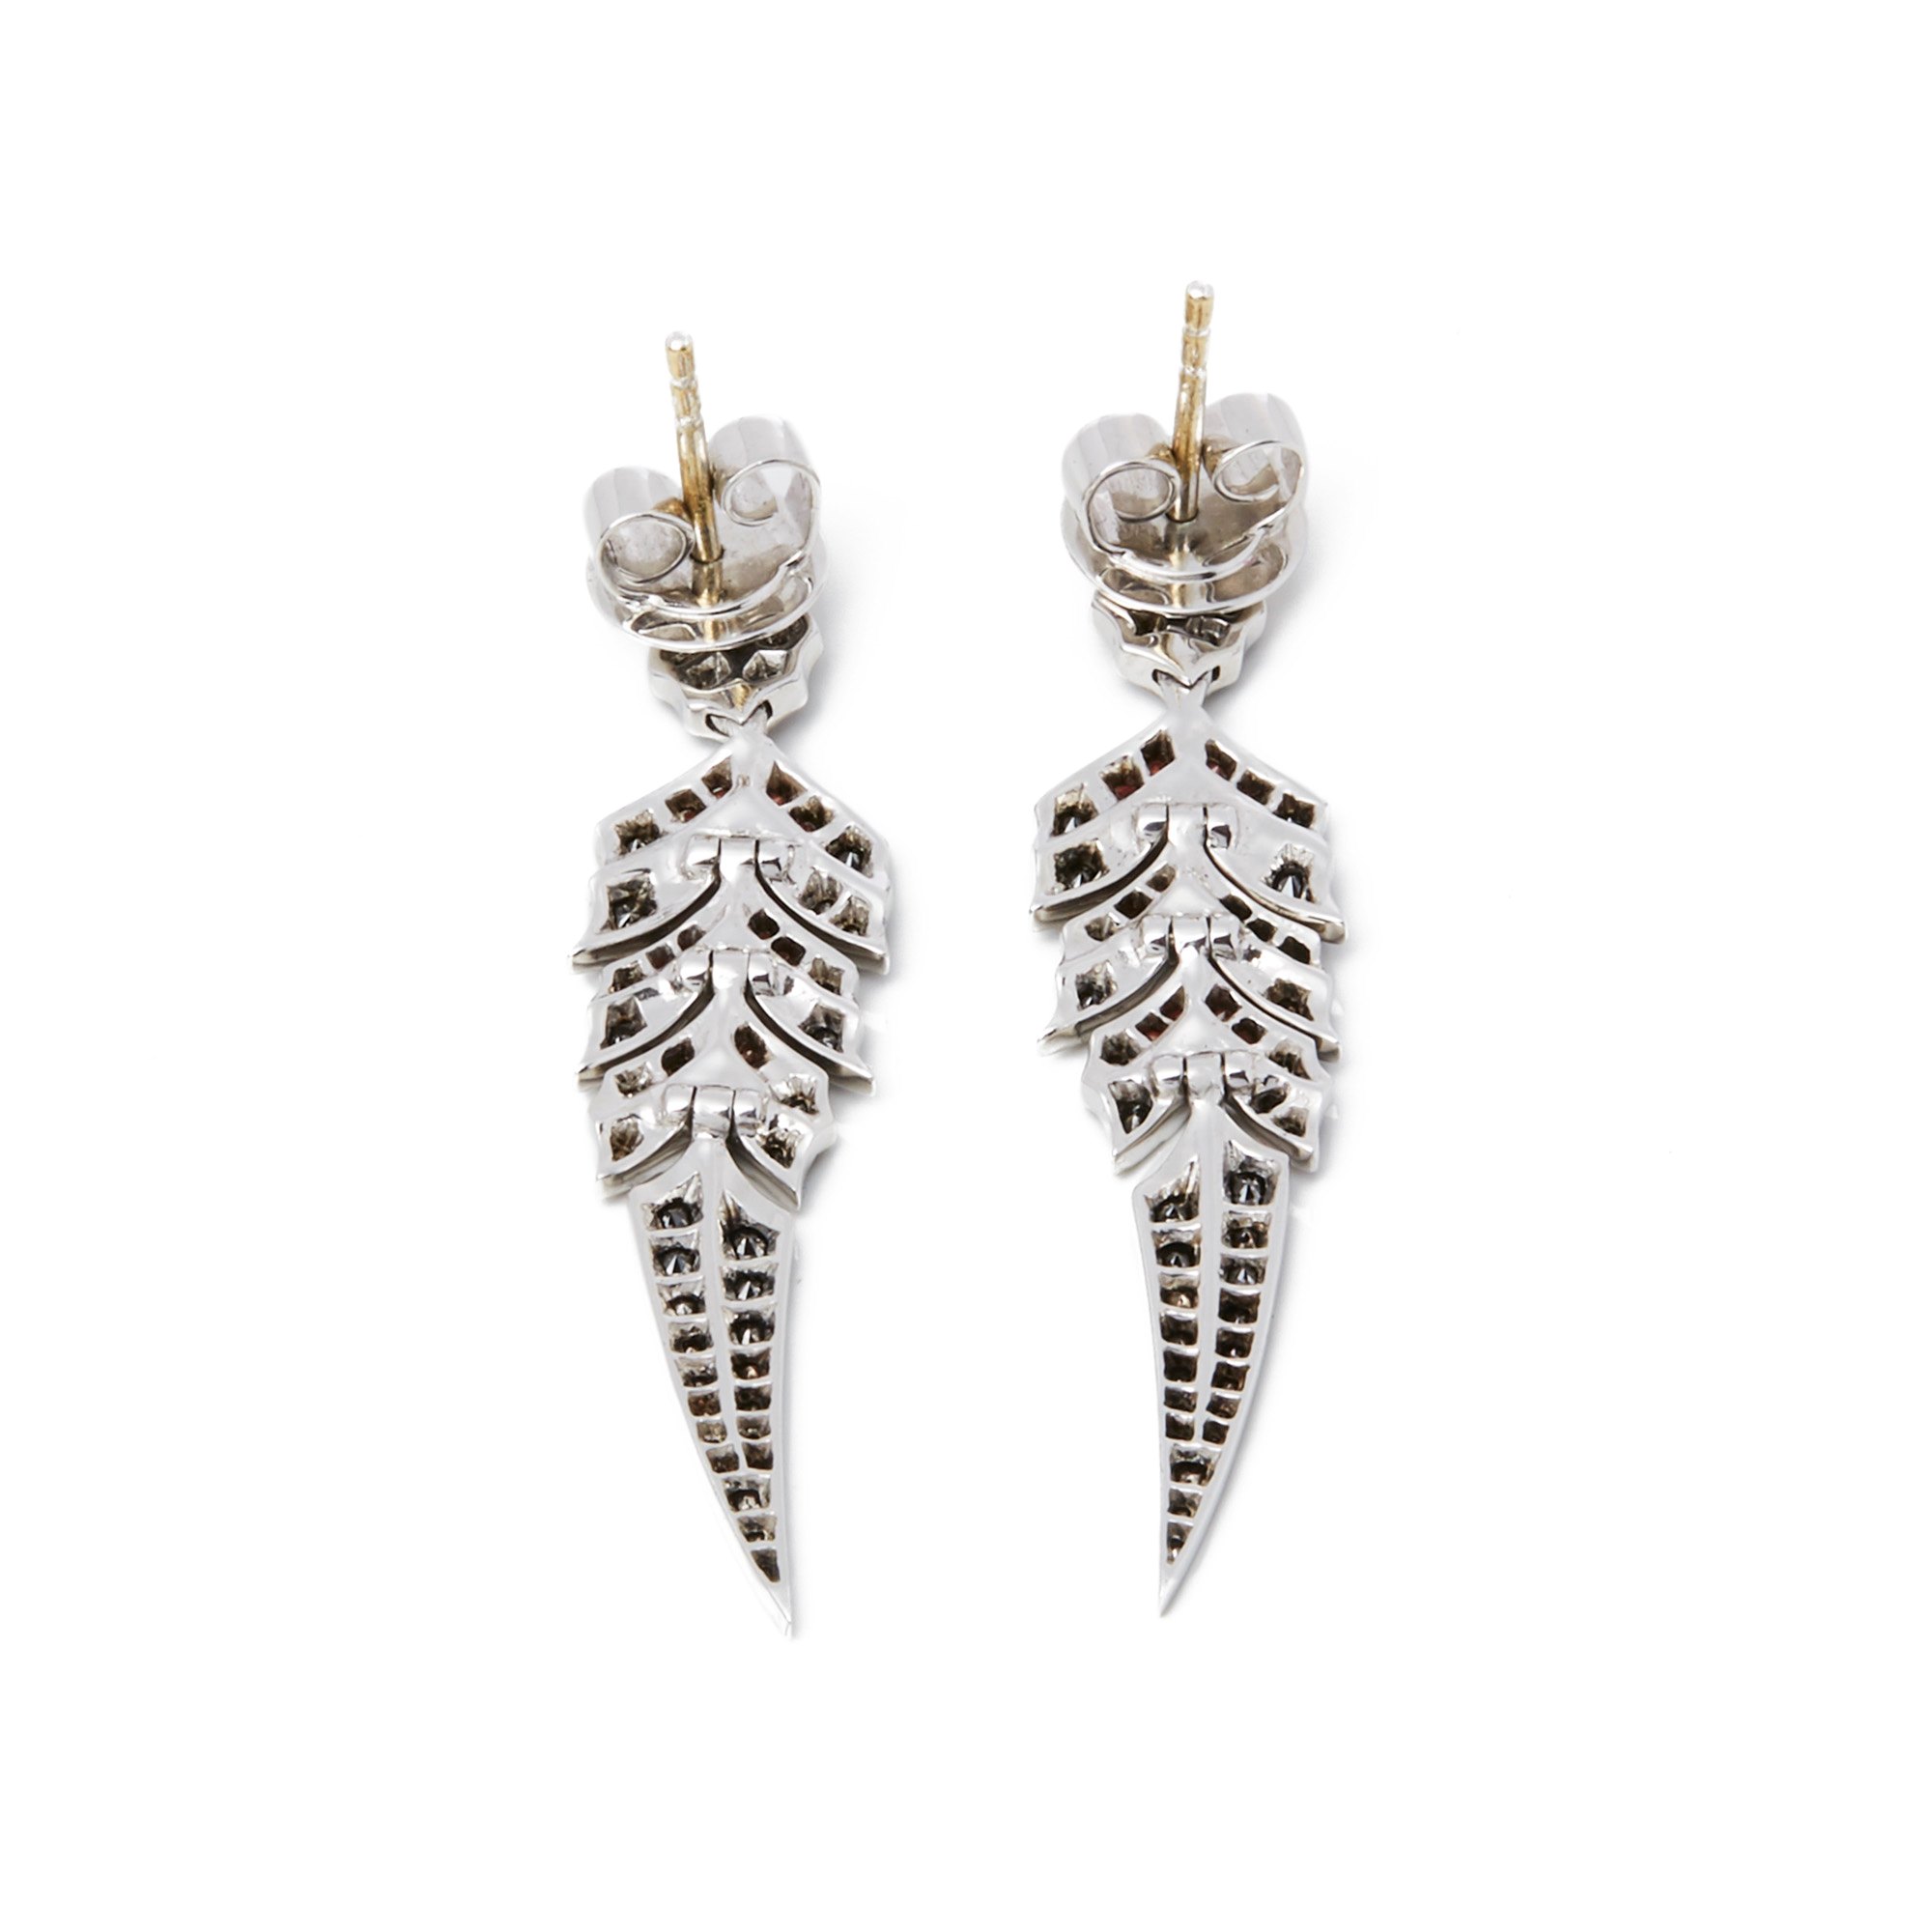 Stephen Webster Magnipheasant Black Diamond and Sapphire Earrings